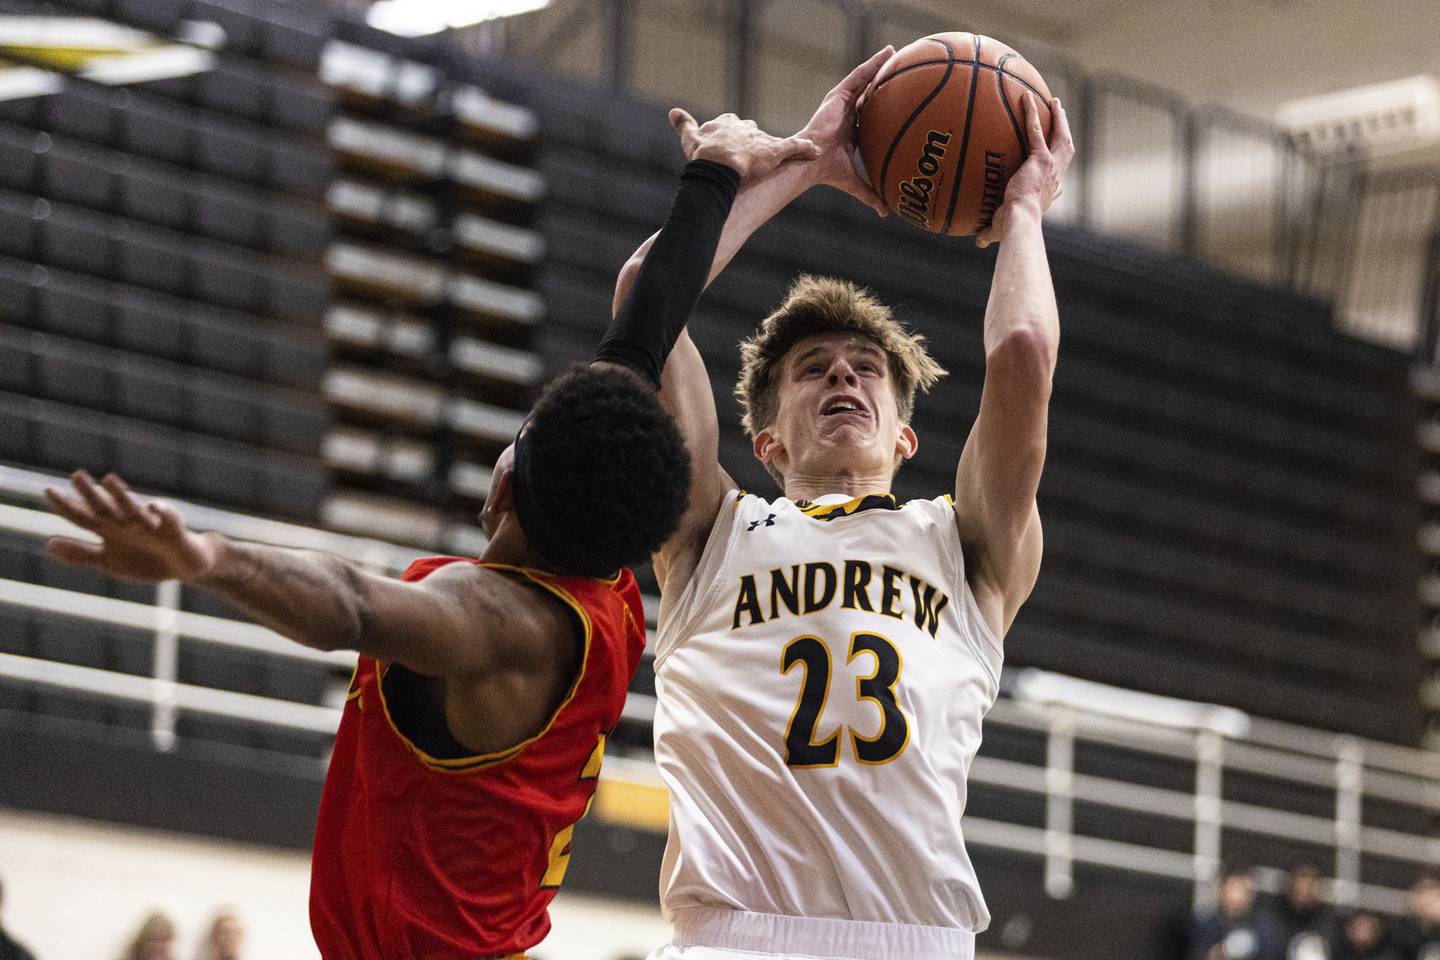 Andrew’s Natahn LaPlant (23) takes a shot over Tinley Park's Myles Haythorne (2) during a nonconference game in Tinley Park on Wednesday, Dec. 14, 2022.